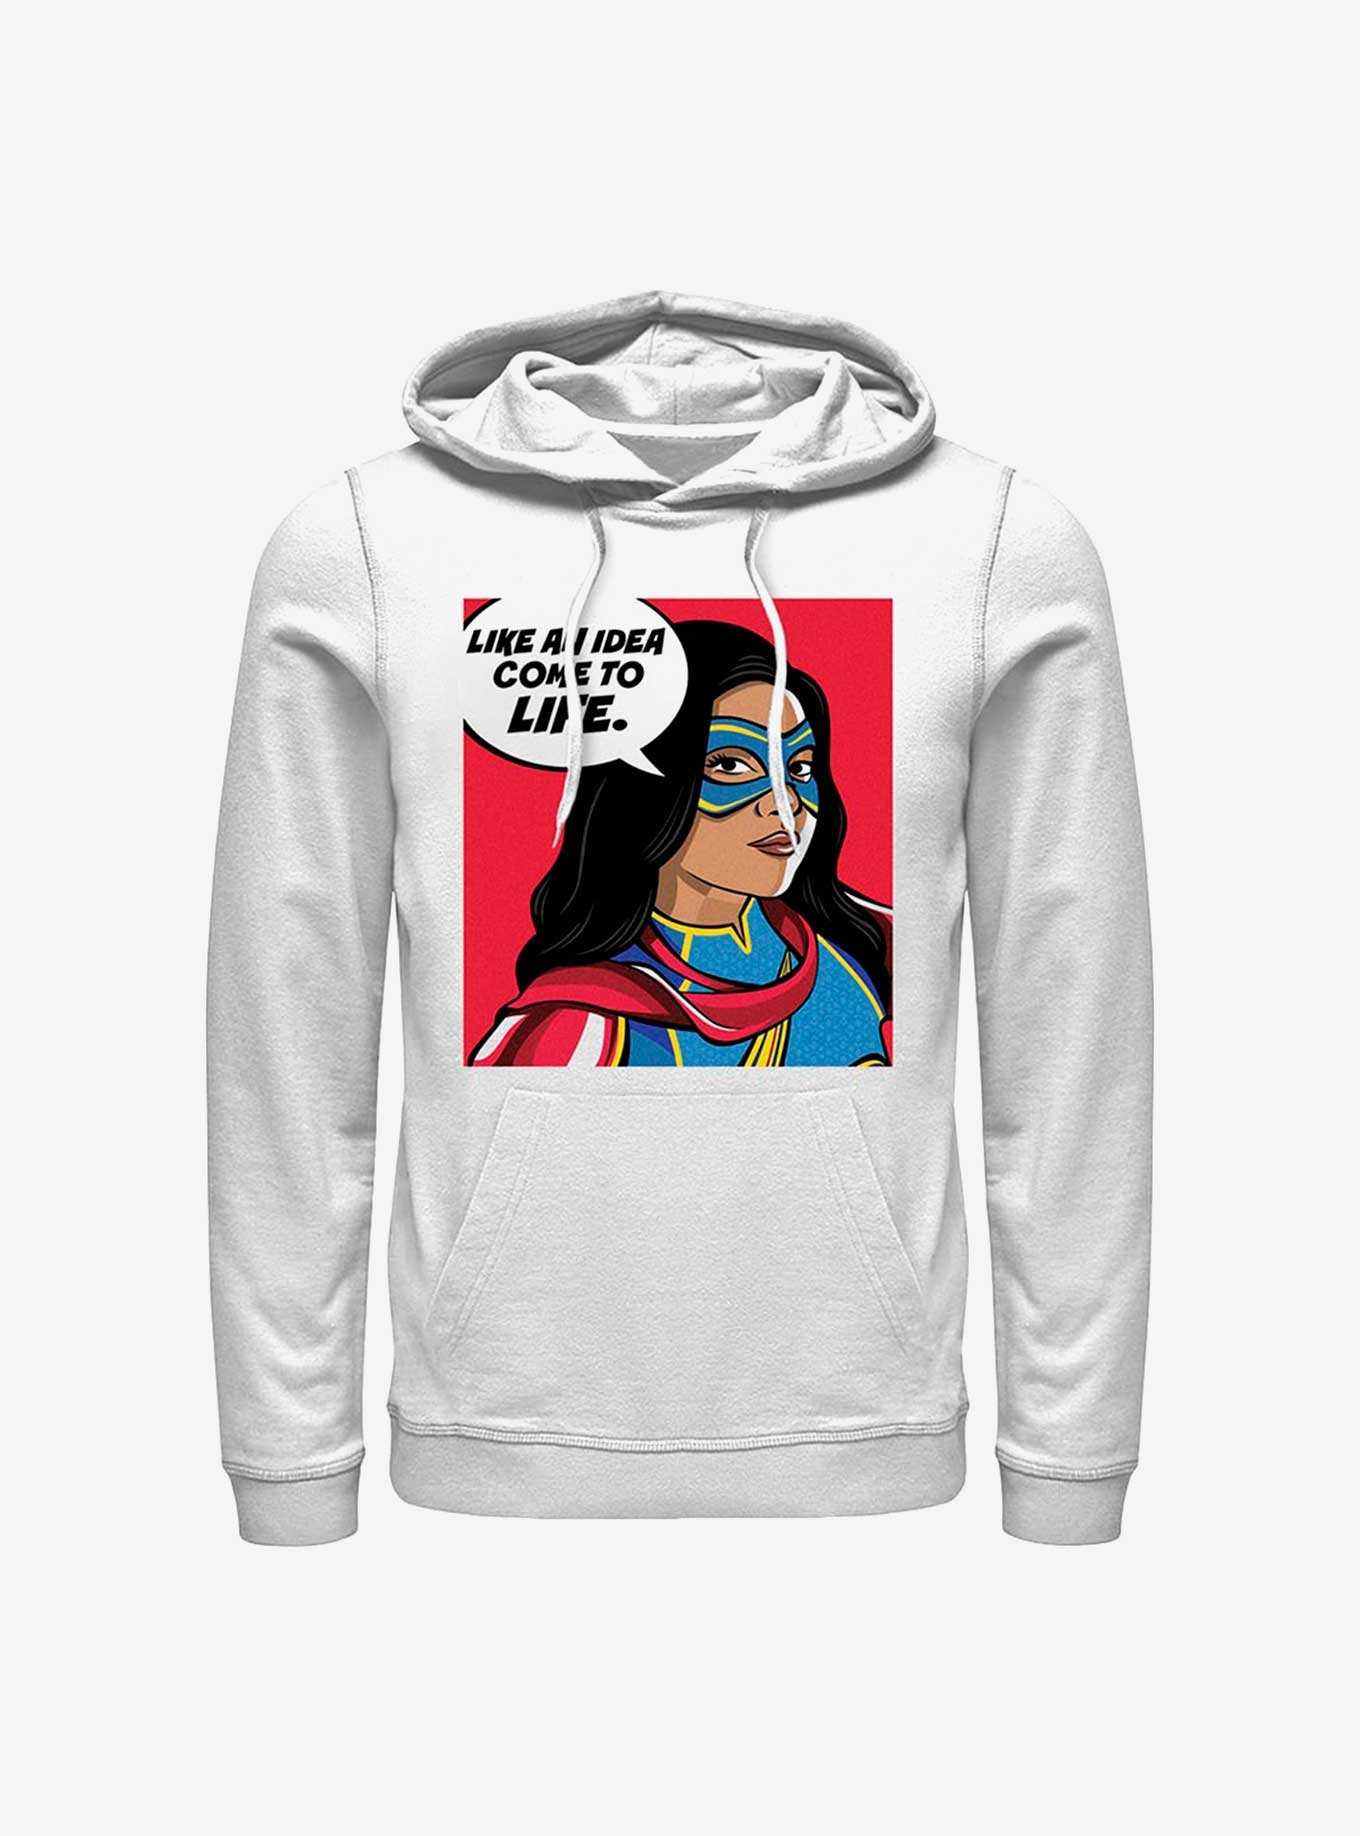 Marvel Ms. Marvel Idea Come To Life Hoodie, , hi-res